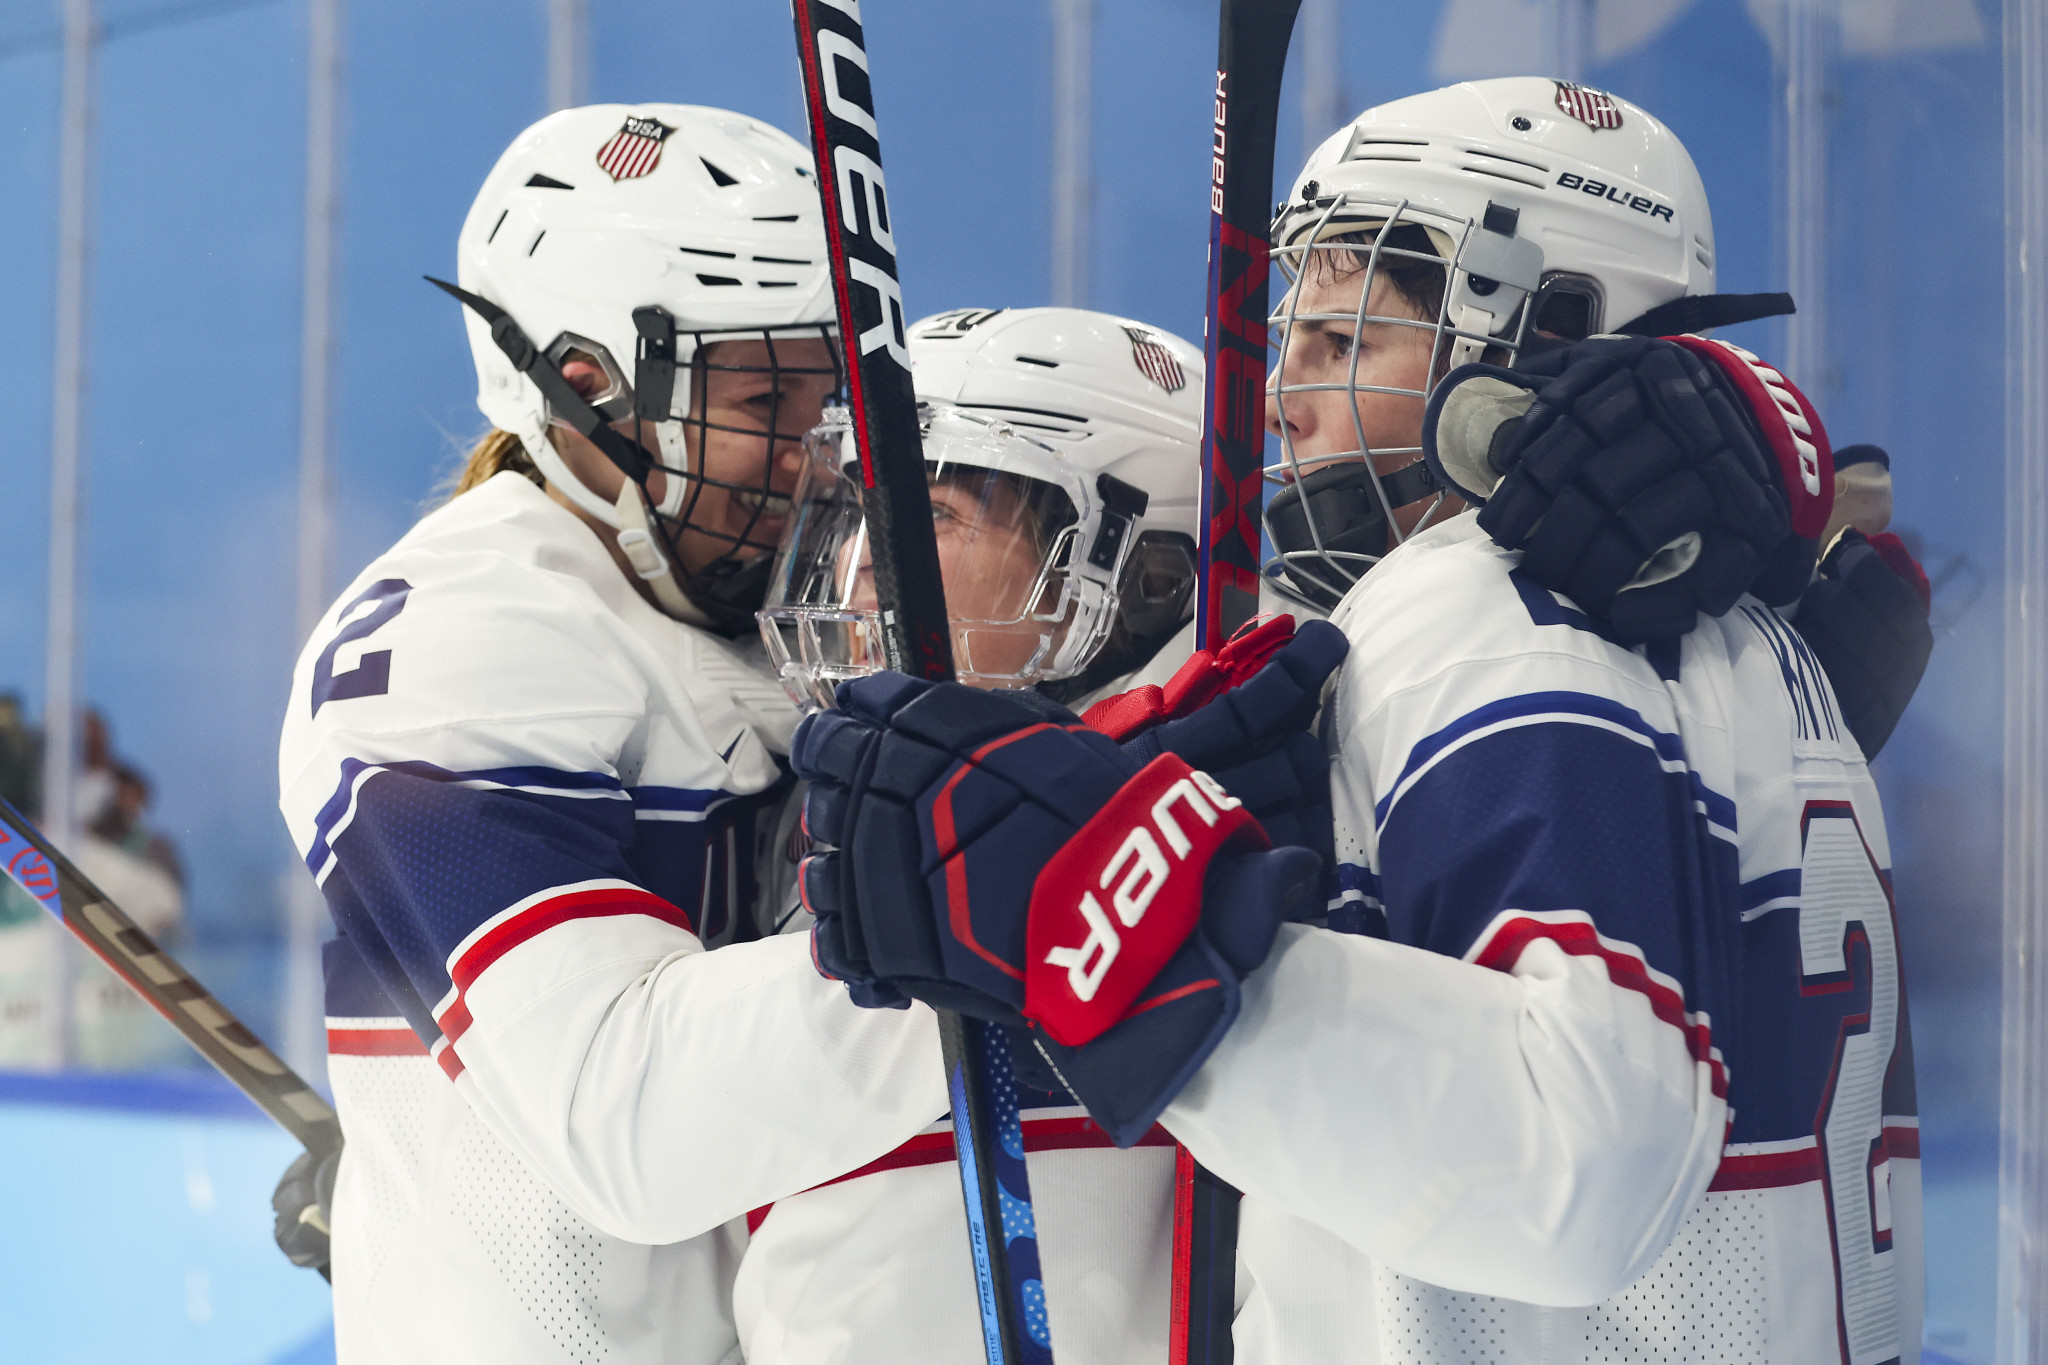 United States to face Hungary in IIHF Women's World Ice Hockey Championship quarter-finals